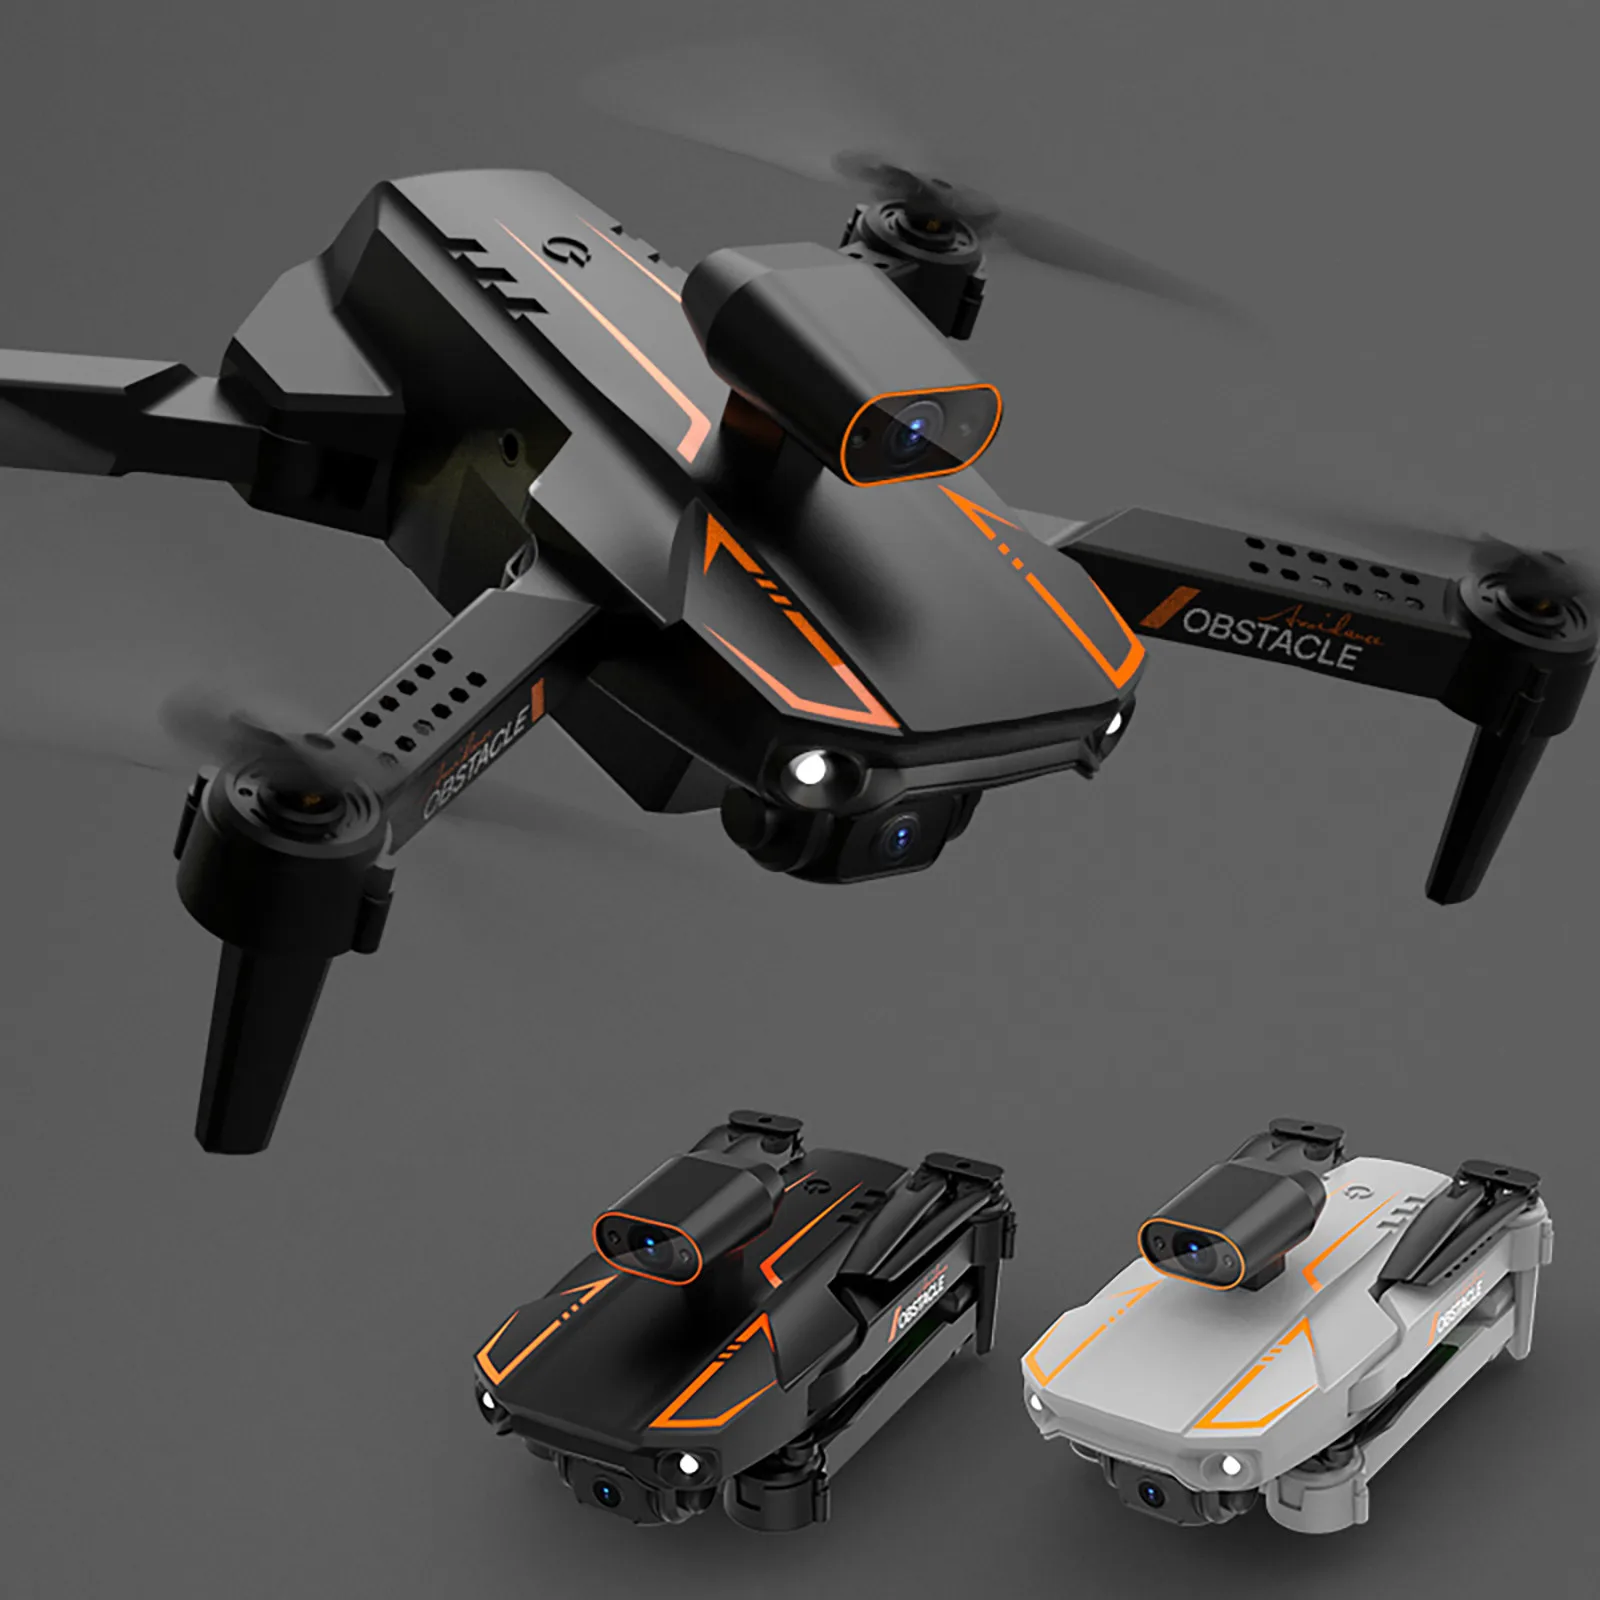 Utoghter S91 Folding Real-time Aerial Photography Four-axis Toy Gift Fixed - $57.44